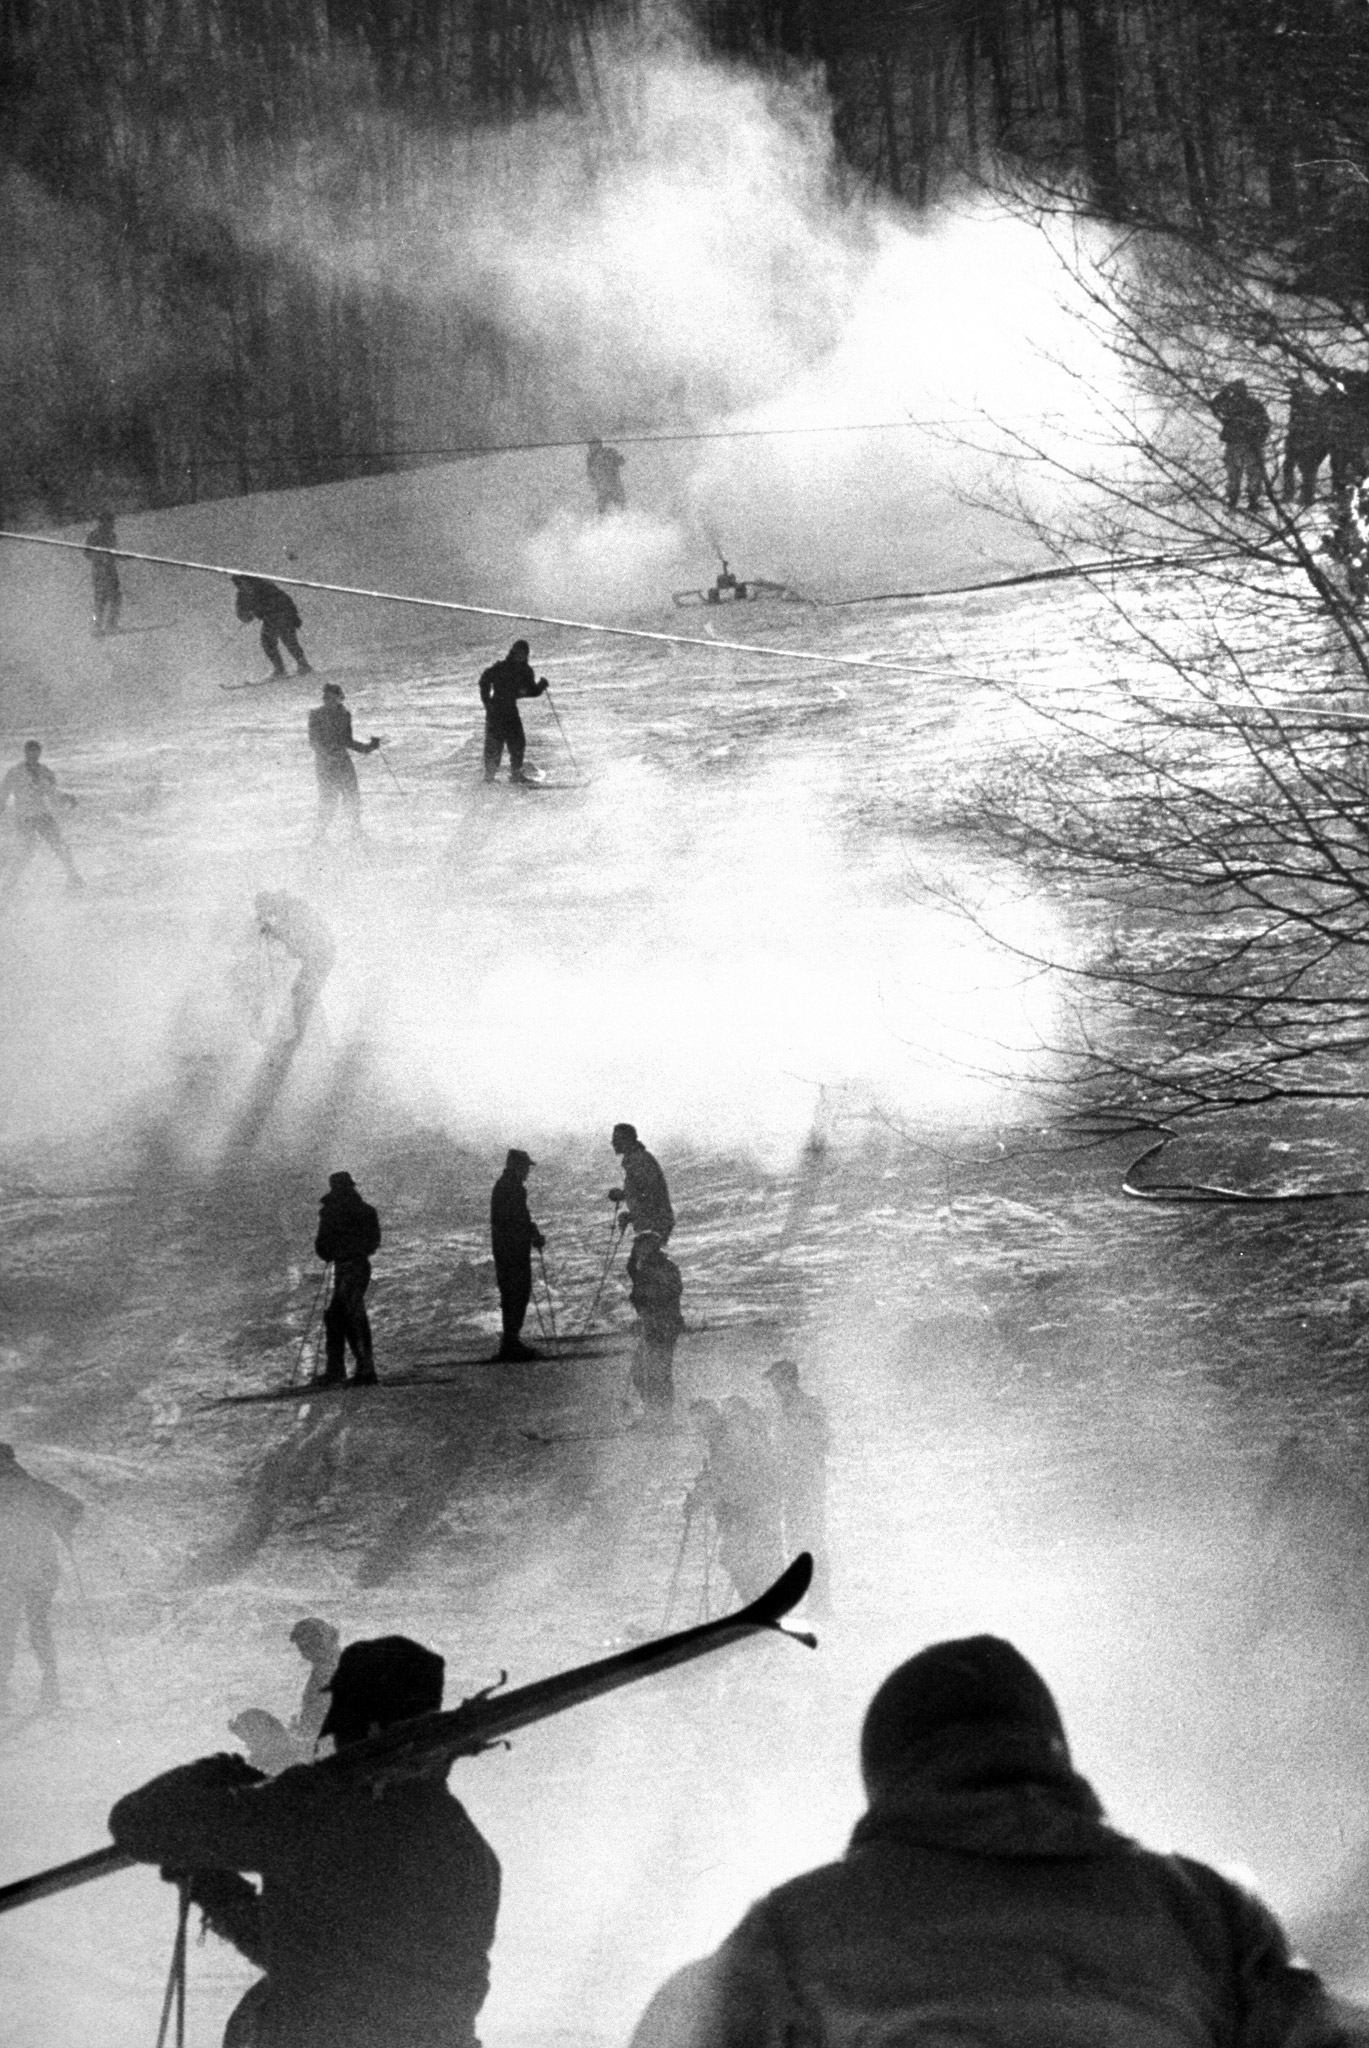 Manufactured snow, blowing from nozzles, veils skiers in mists at Bousquet's, near Pittsfield Mass. During a January thaw, Bousquet's was jammed with skiers unable to ski elsewhere. The artificial powdery surface, made from compressed air and water, can be laid at temperature below 32 degrees.